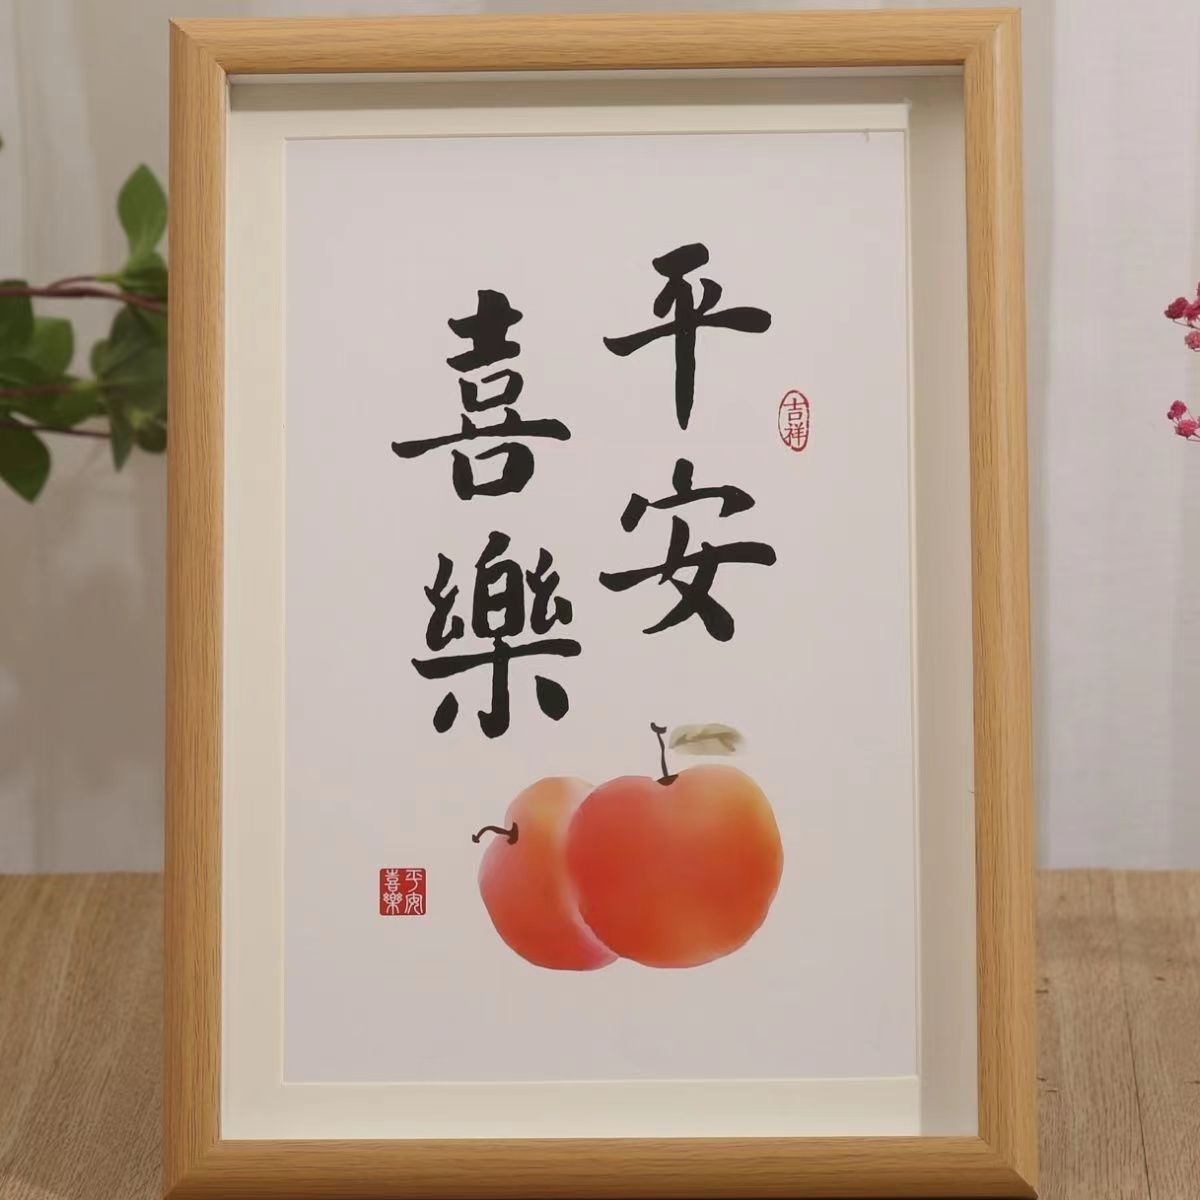 Study Hard and Stick to Cool Photo Frame Decoration Student Table Decoration Encourage Children Calligraphy Calligraphy and Painting Study Picture Frame Wholesale